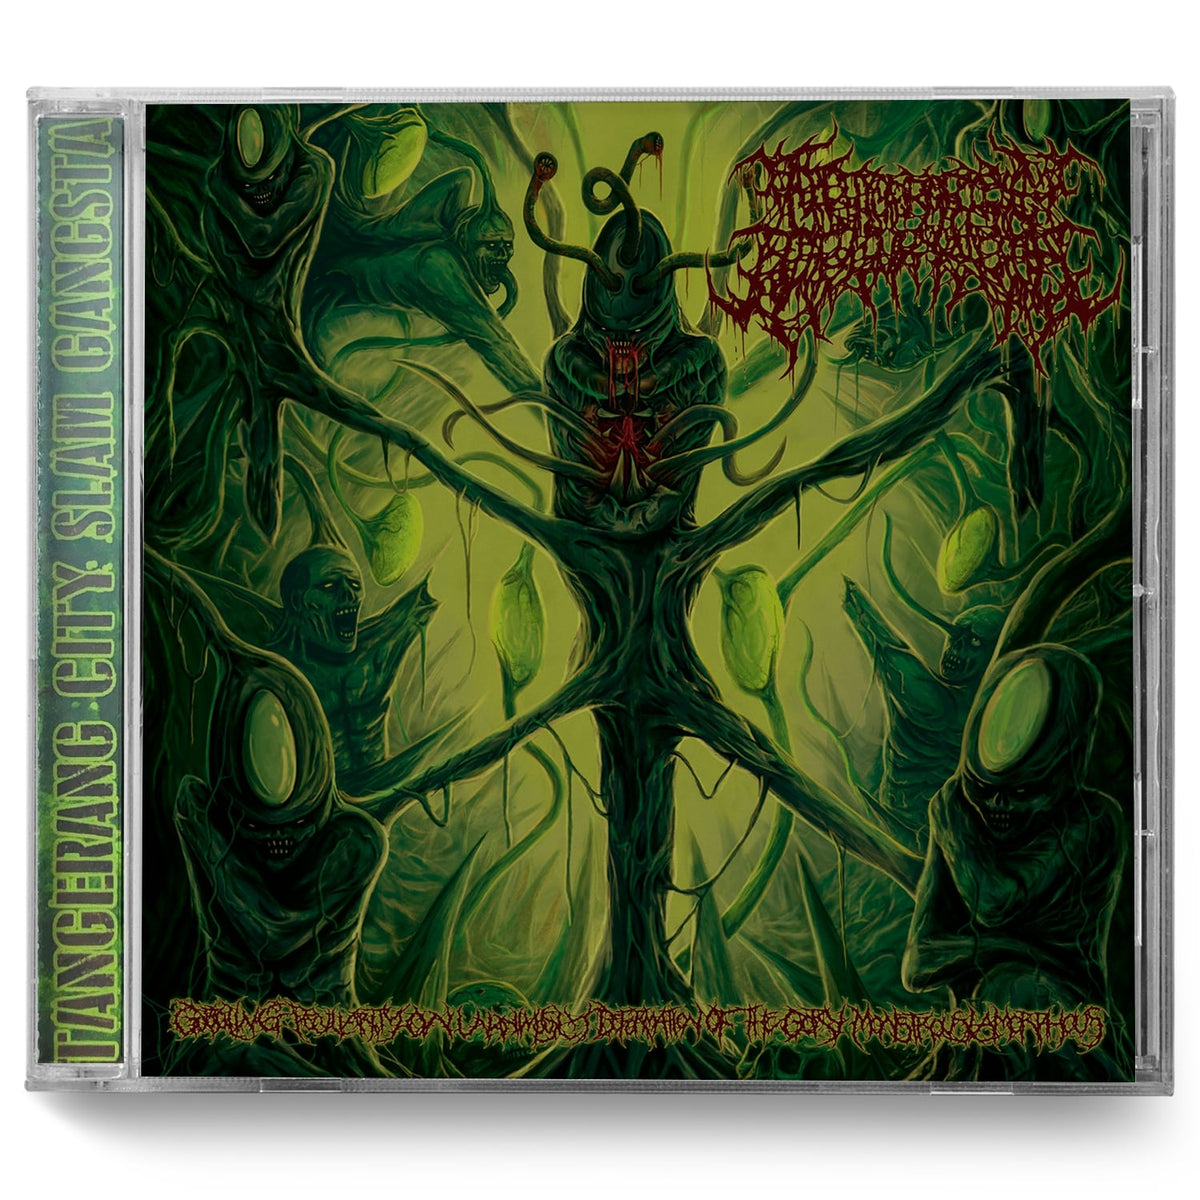 Abominable Devourment "Gobbling Peculiarity on Unanimously Deformation of the Gory Monstrouslamorphous" CD - Miasma Records